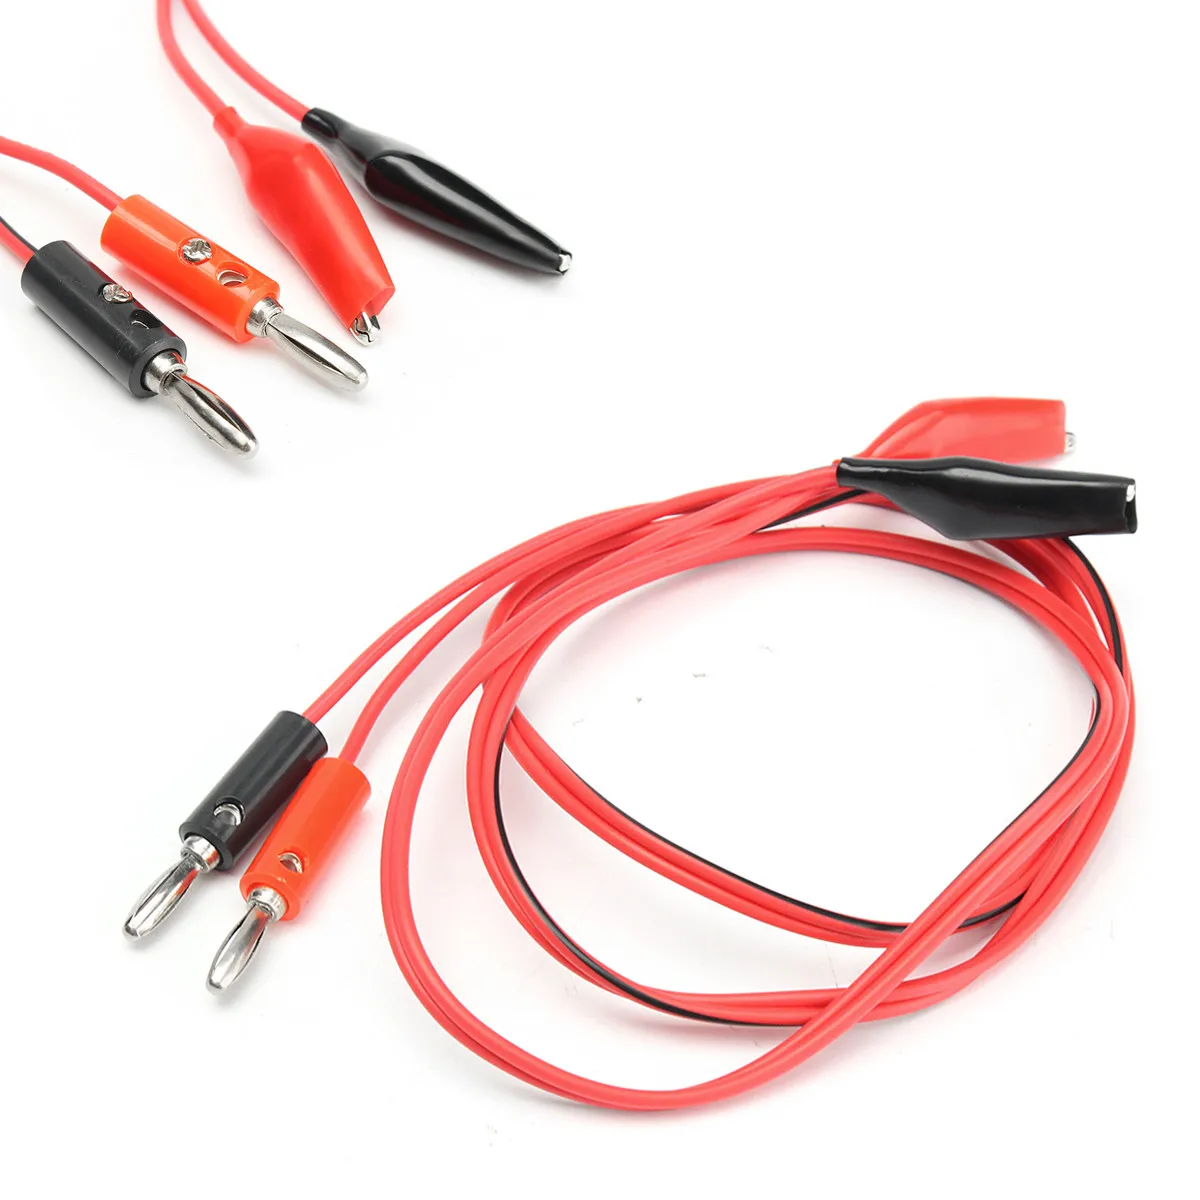 Hot 1m Long Red Alligator Clip to Banana Plug Probe Cable Test LeaYJIJs4